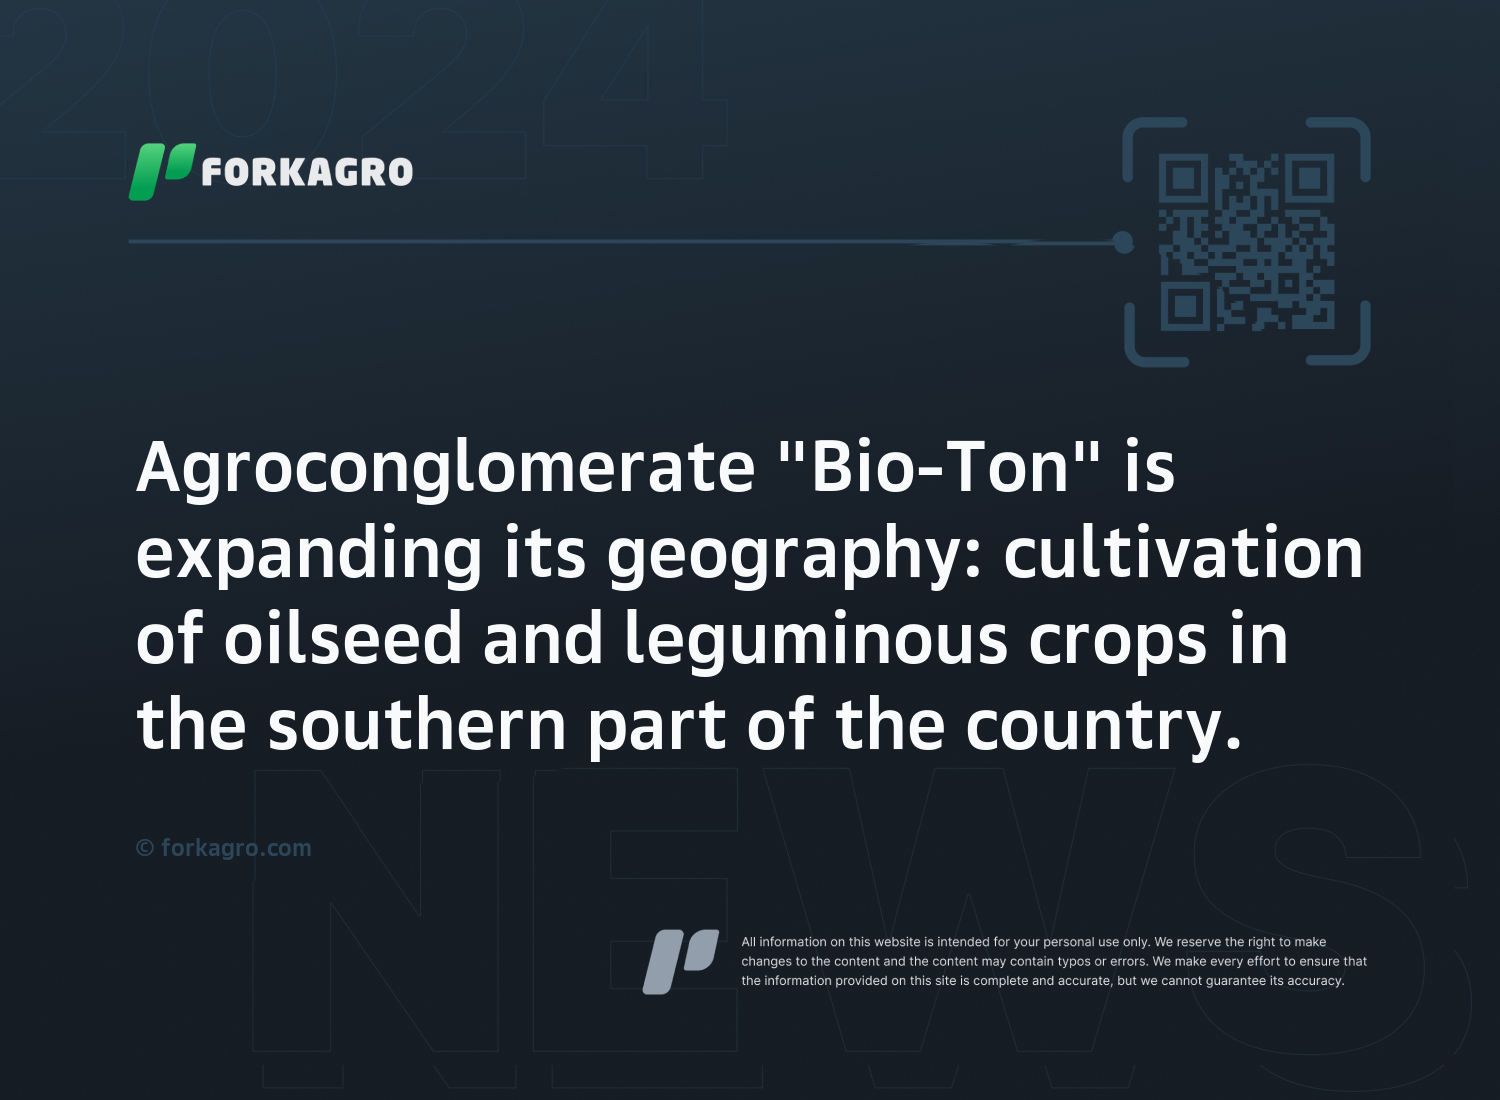 Agroconglomerate "Bio-Ton" is expanding its geography: cultivation of oilseed and leguminous crops in the southern part of the country.